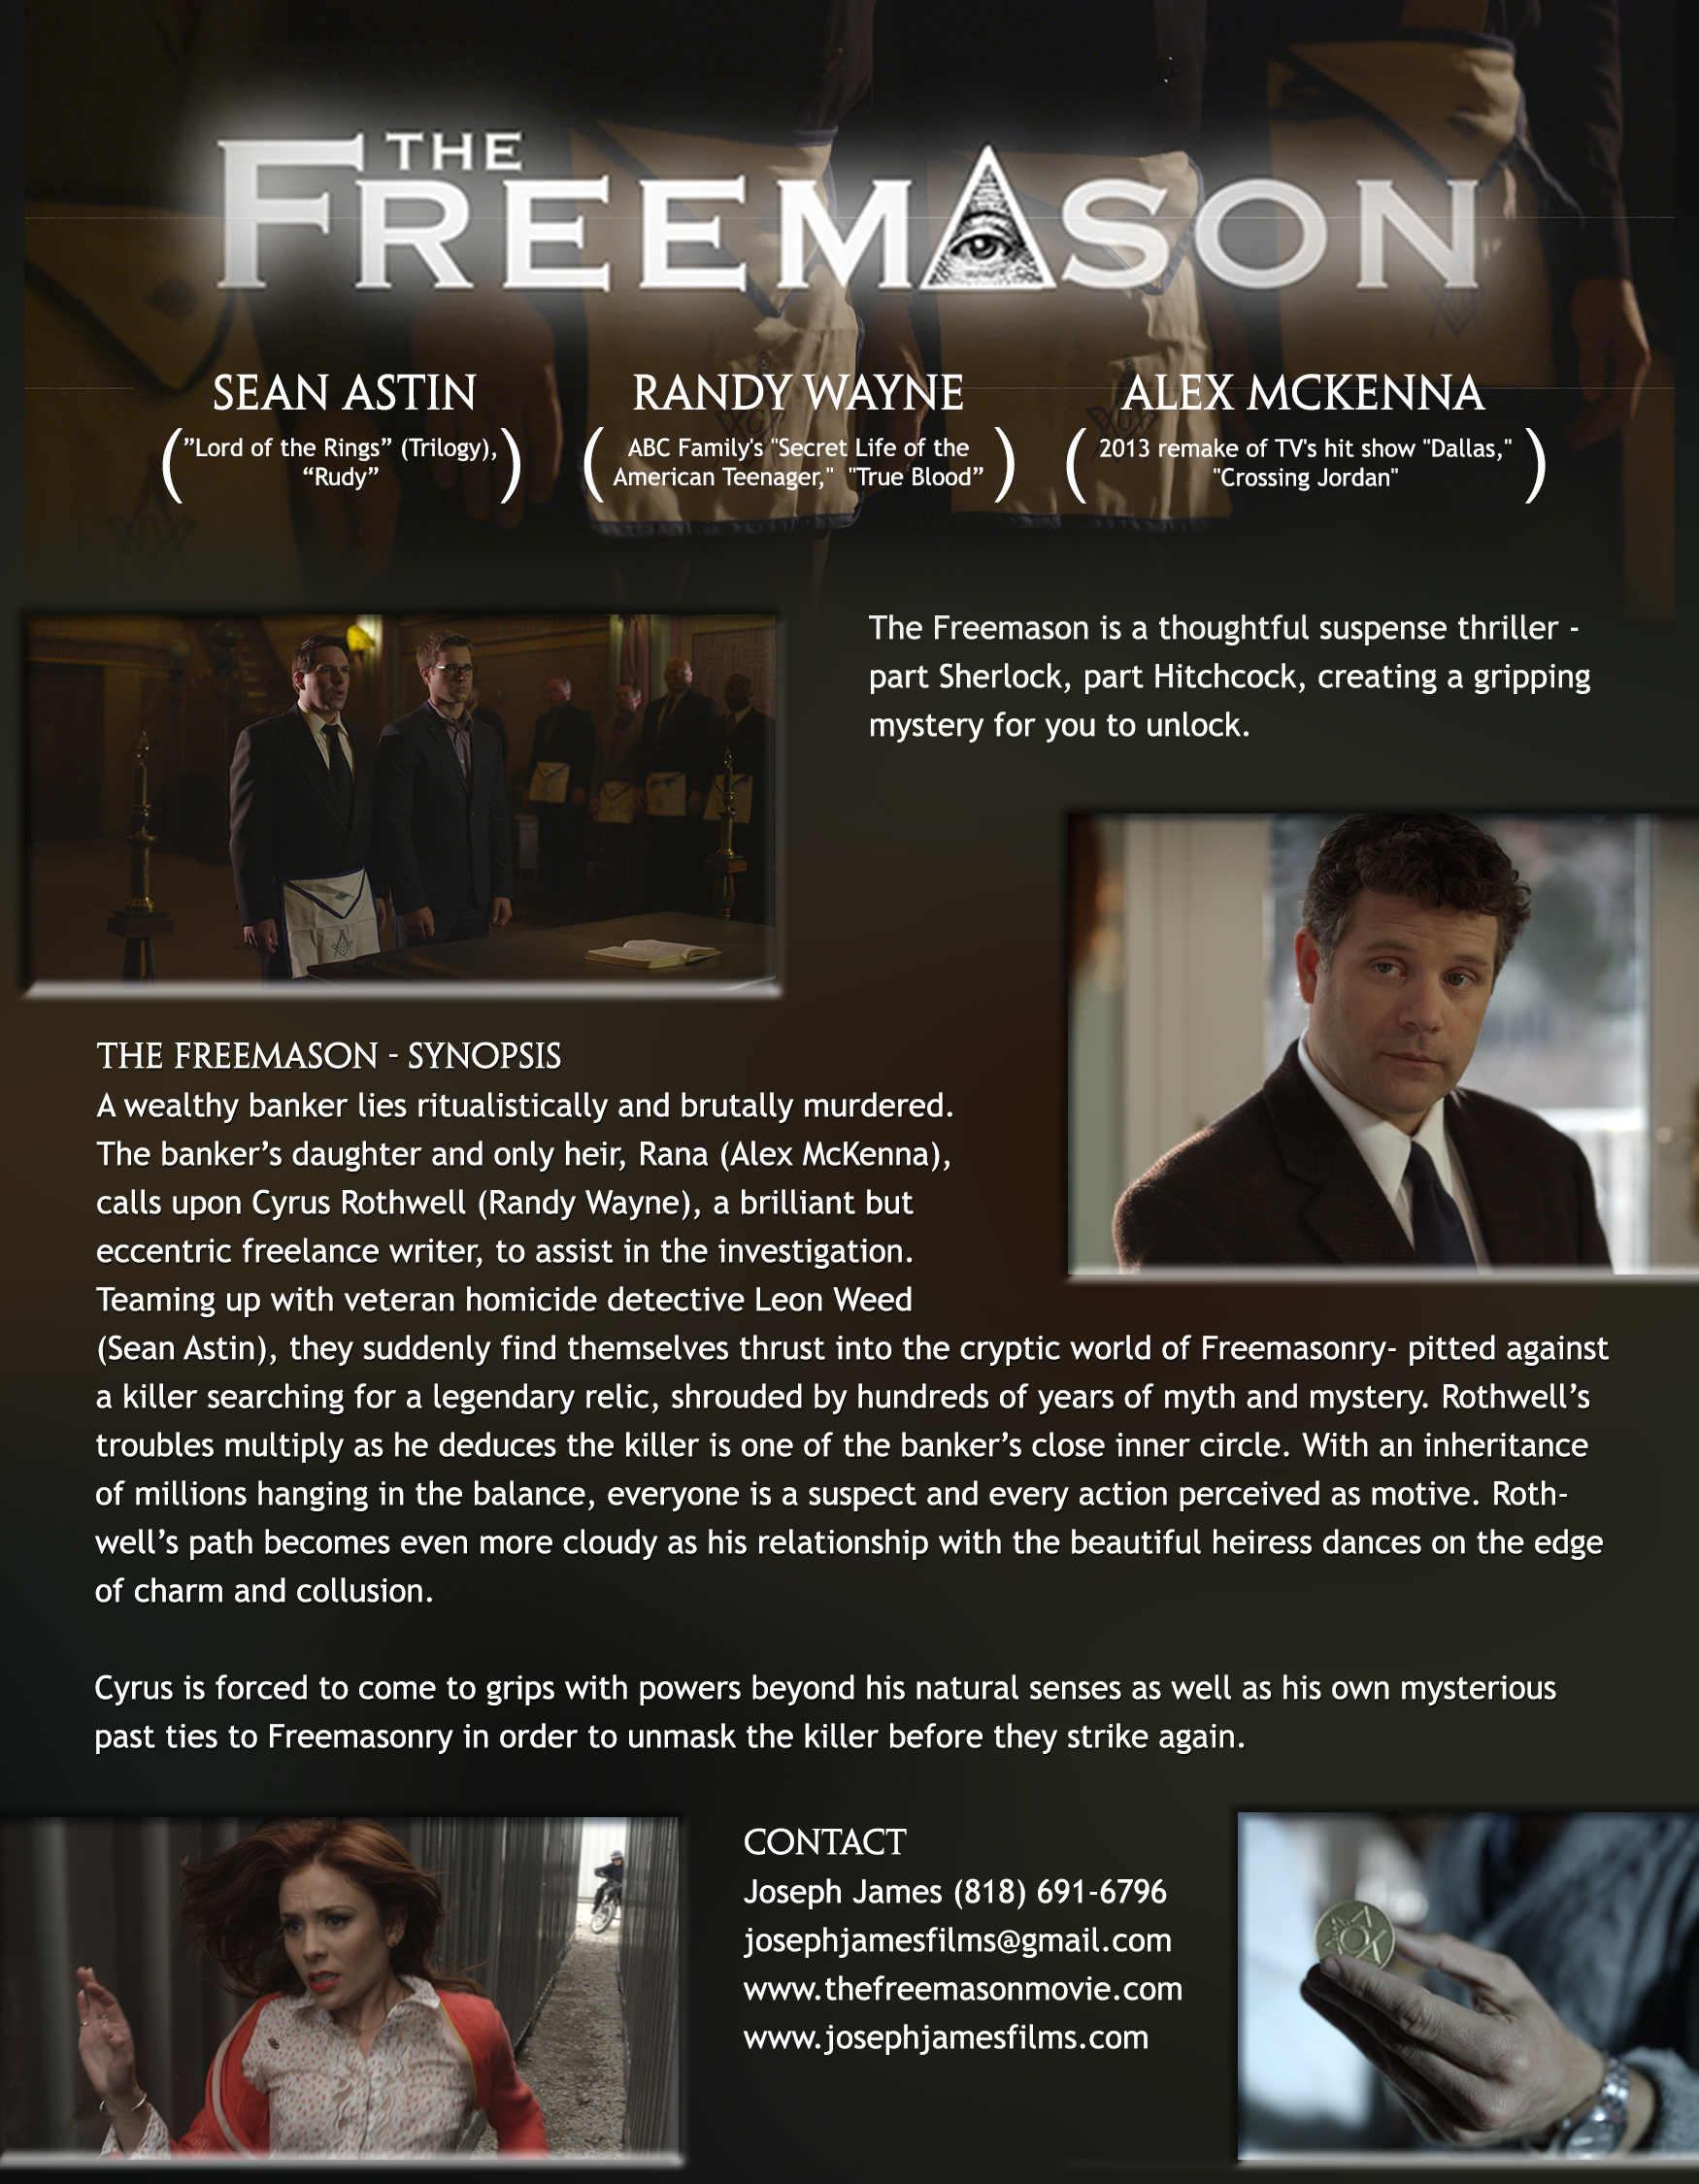 Flyer with information and websites for the movie about the Freemasons produced by Joseph James.